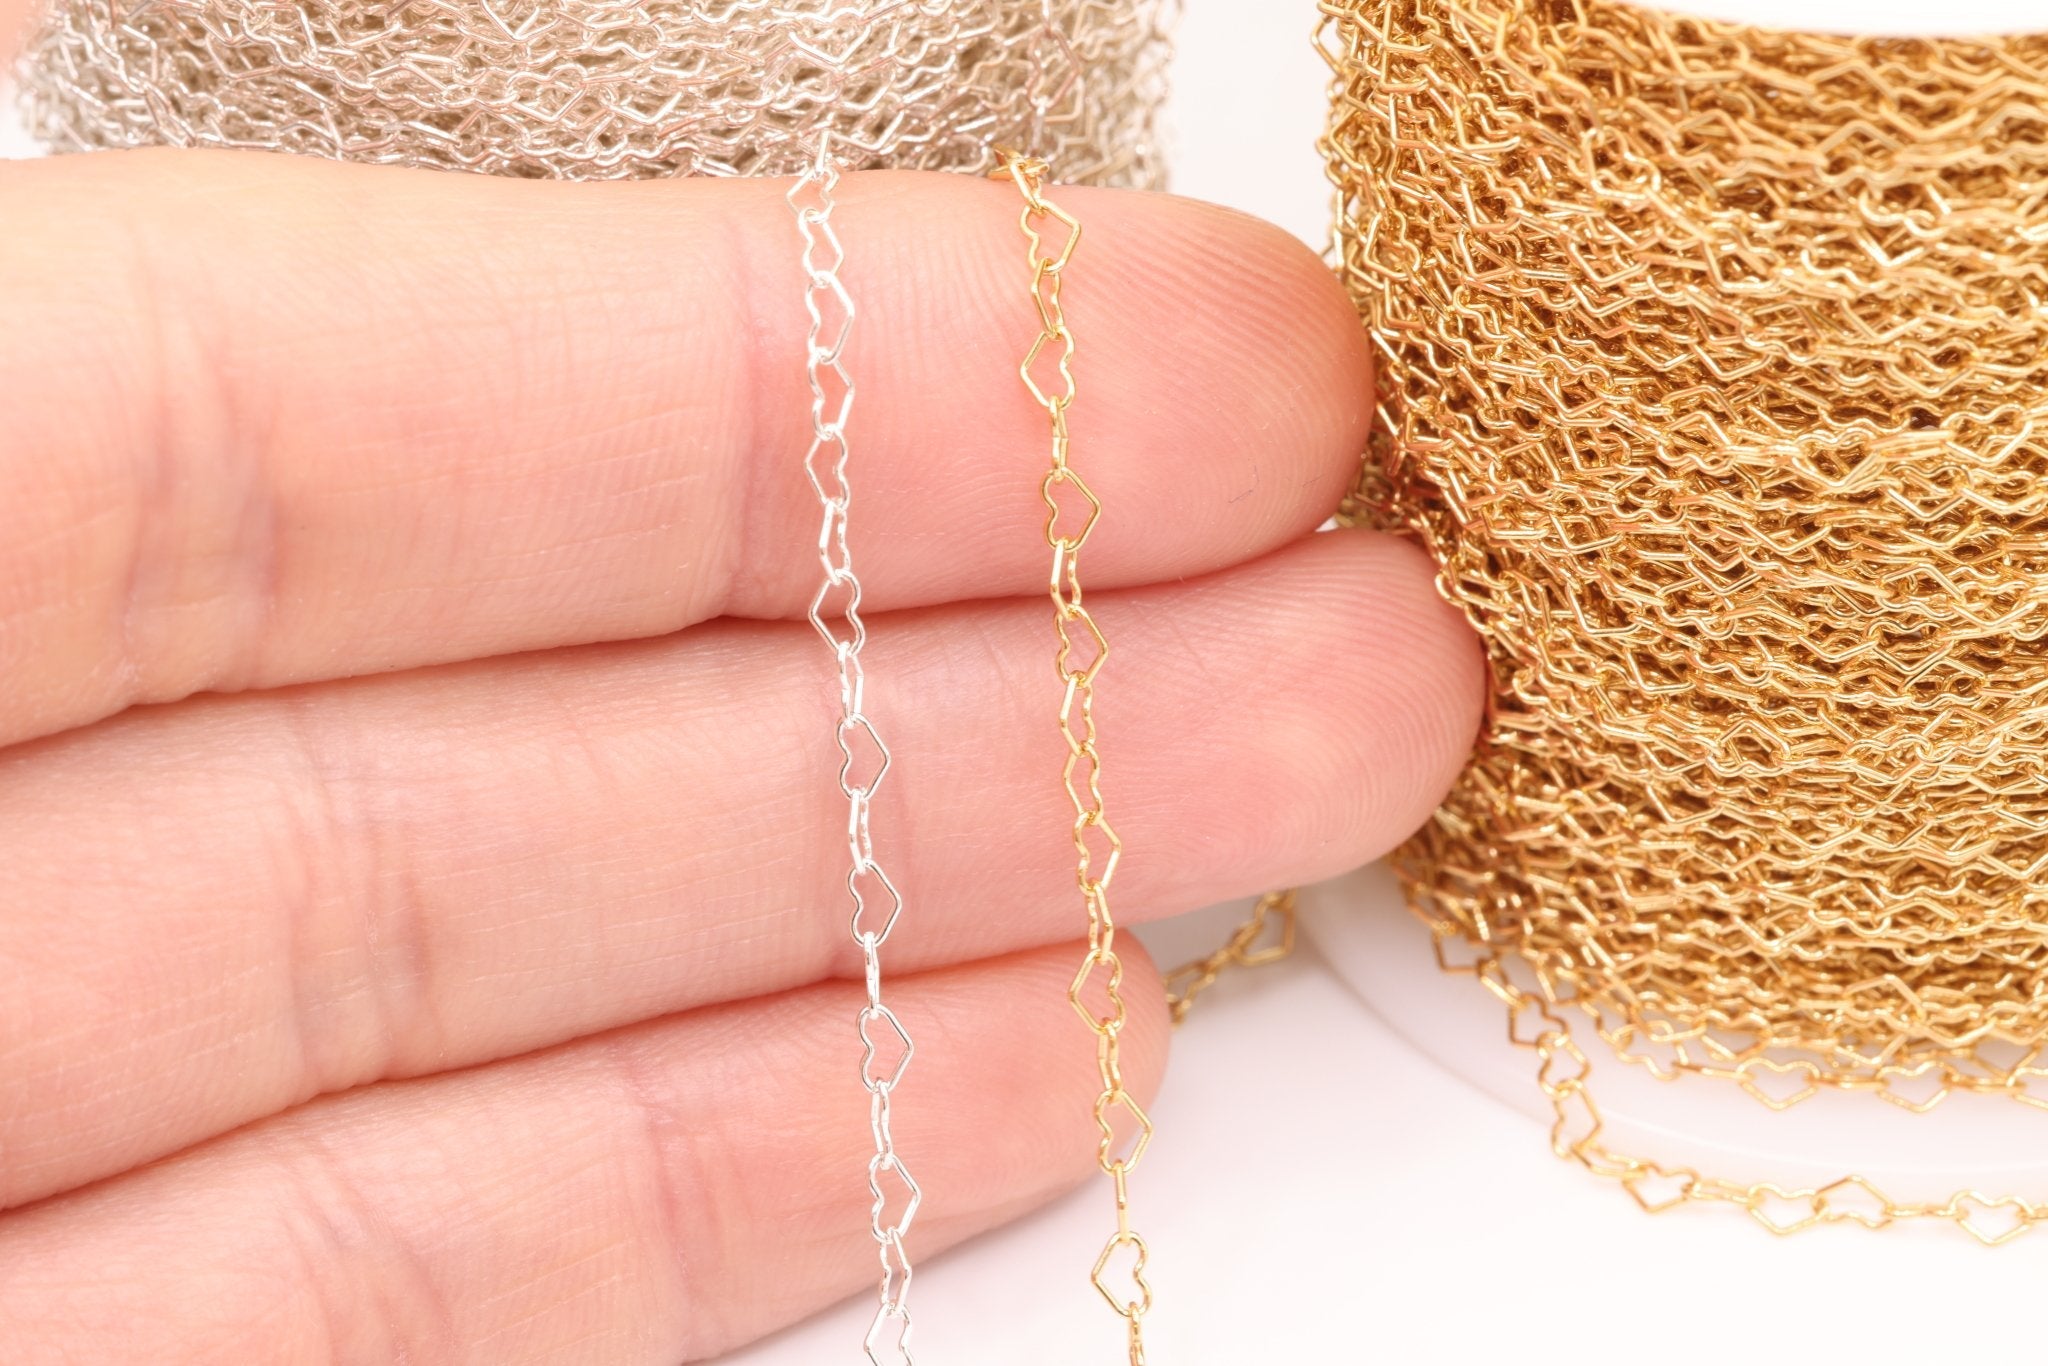 3mm x 2mm Heart Chain, 14K Gold-Filled, Heart Cable Chain Wholesale Jewelry Making - HarperCrown